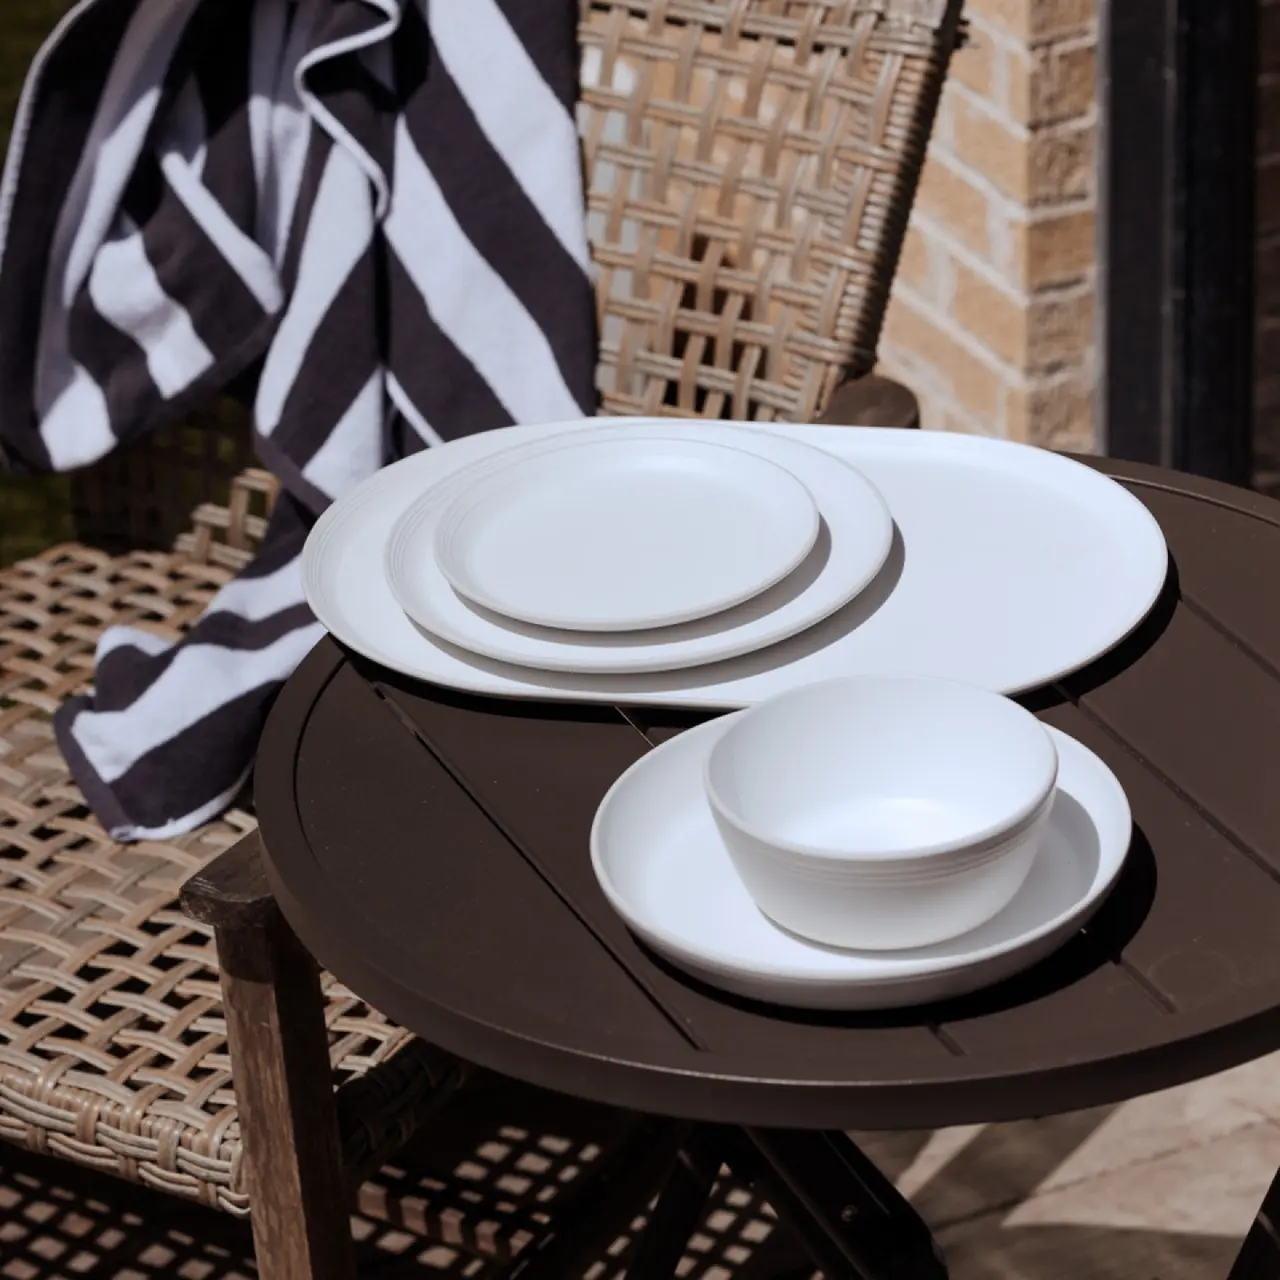 A set of white dishes is neatly stacked on a round outdoor table beside a draped striped towel and a wicker chair in the sunlight.